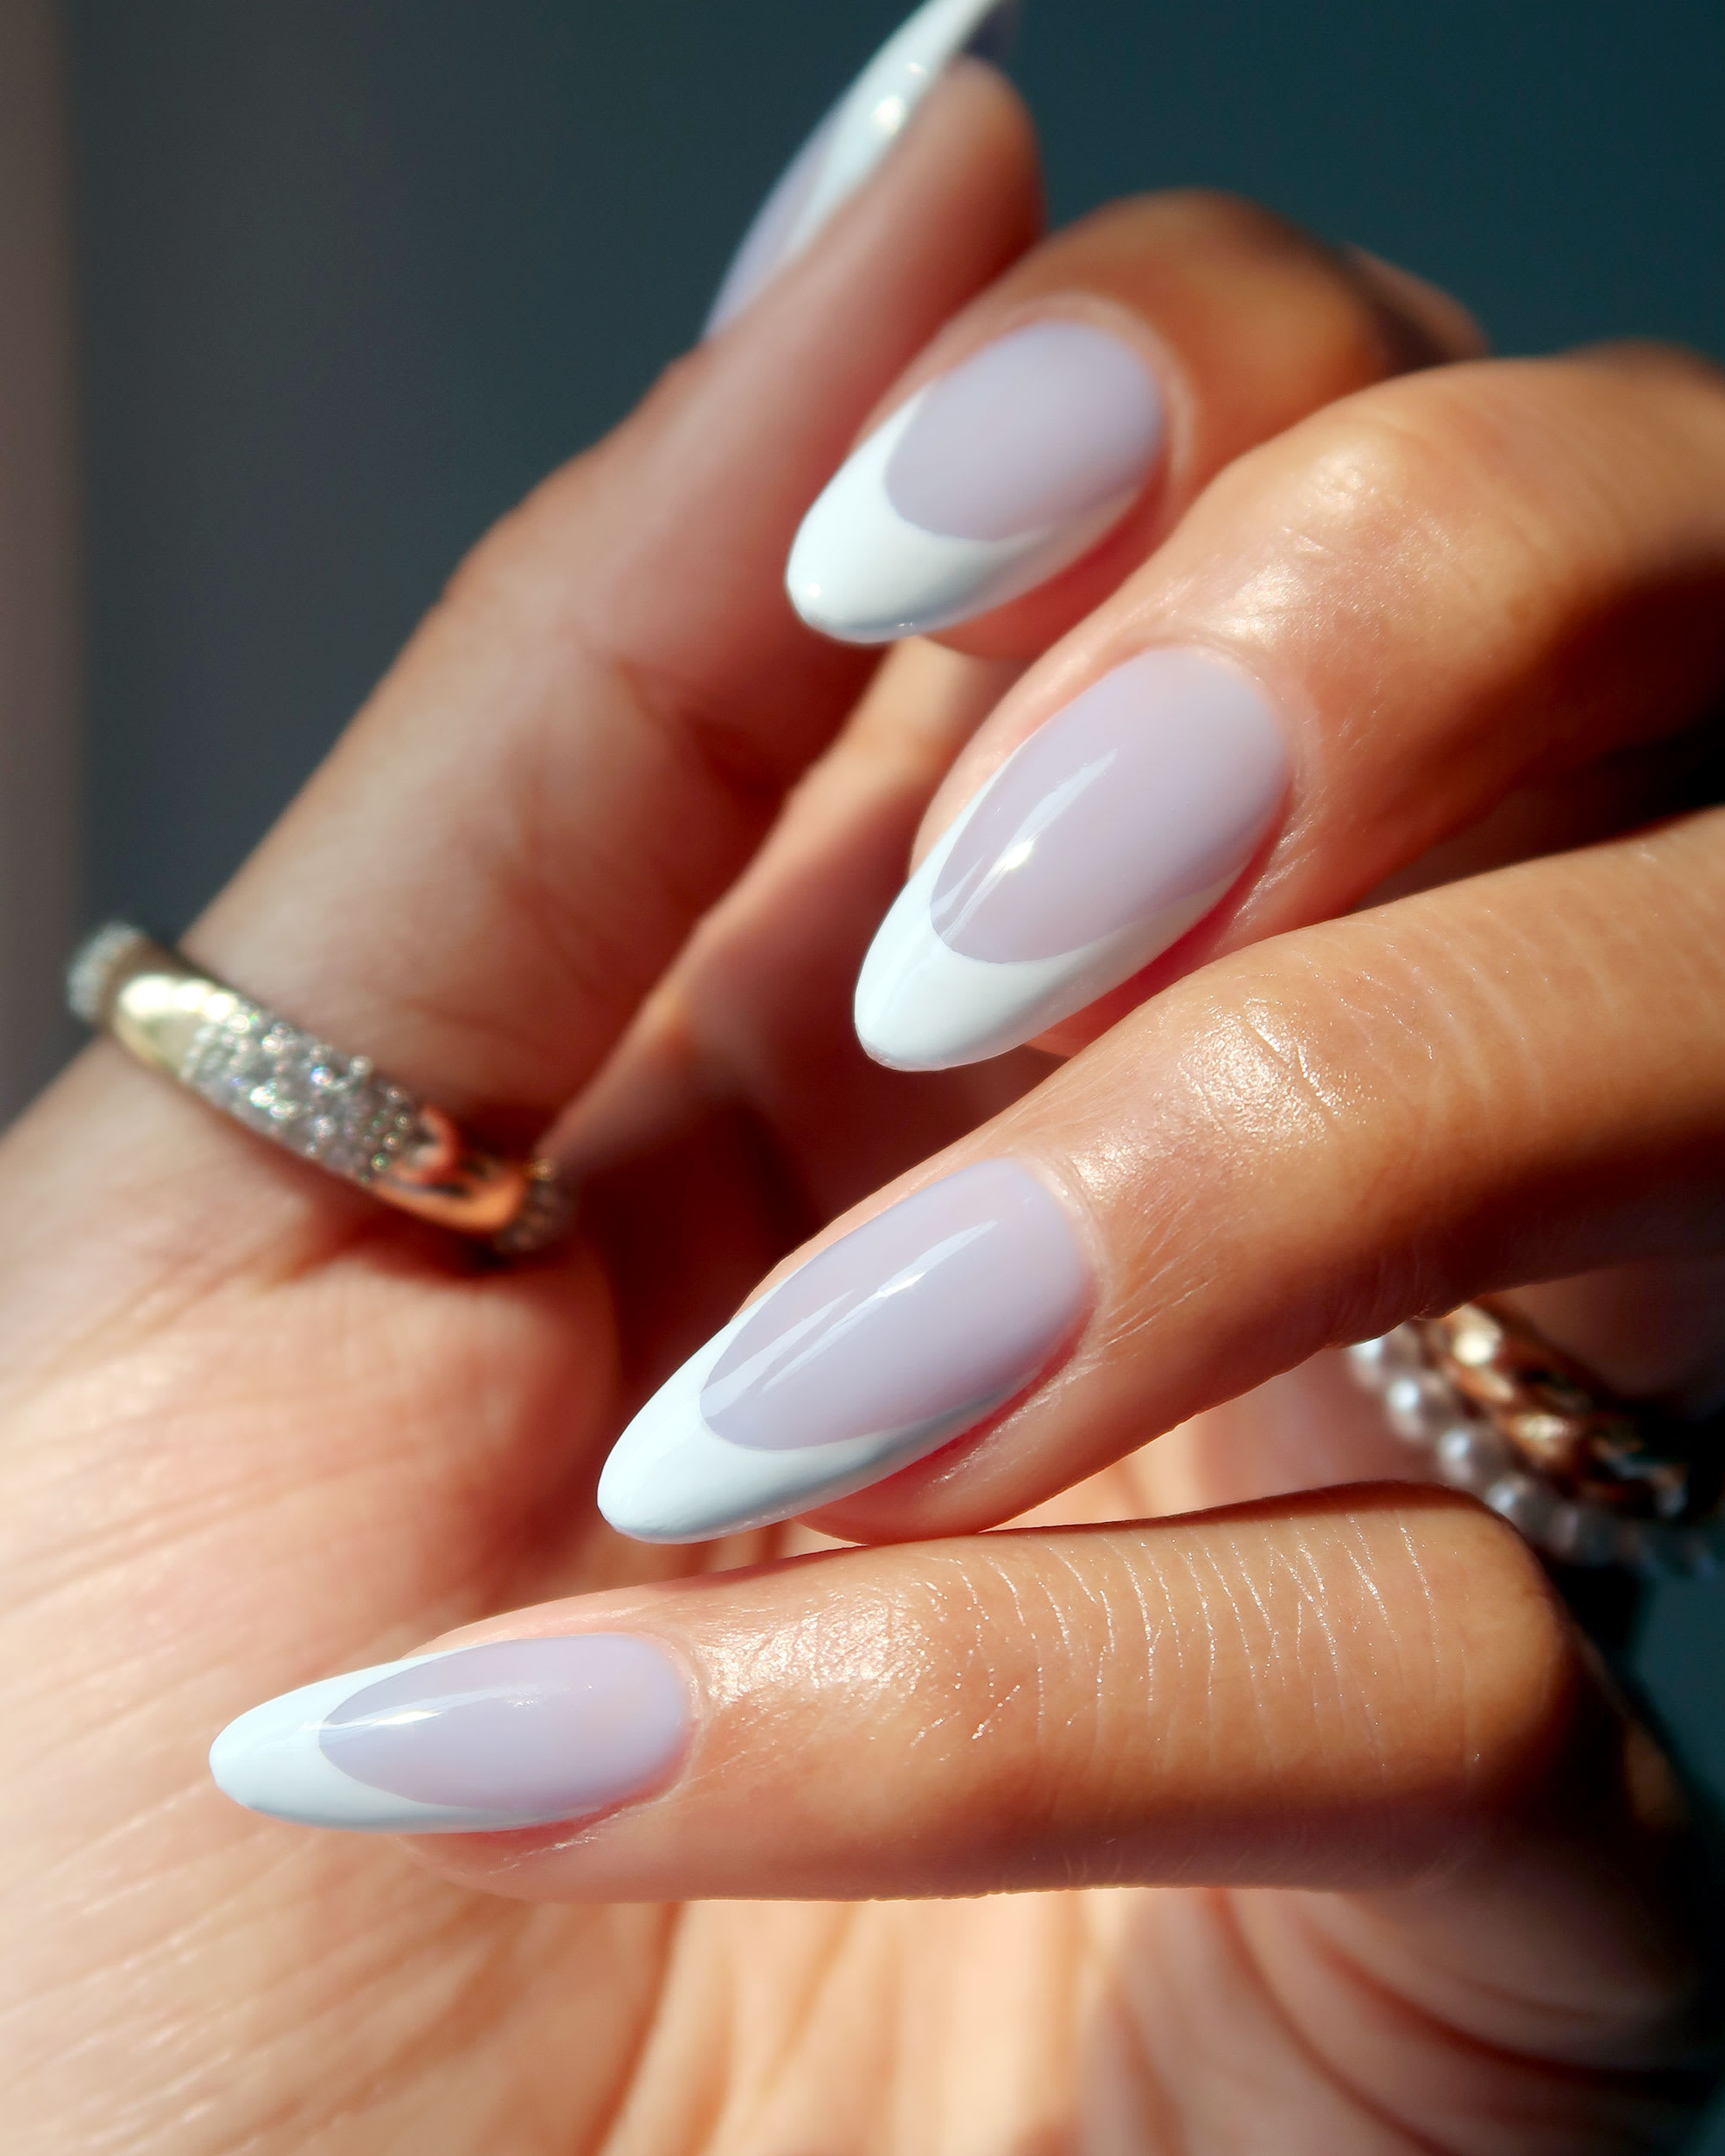 Blue Nails Get Summer | Gallery posted by Mayythi | Lemon8